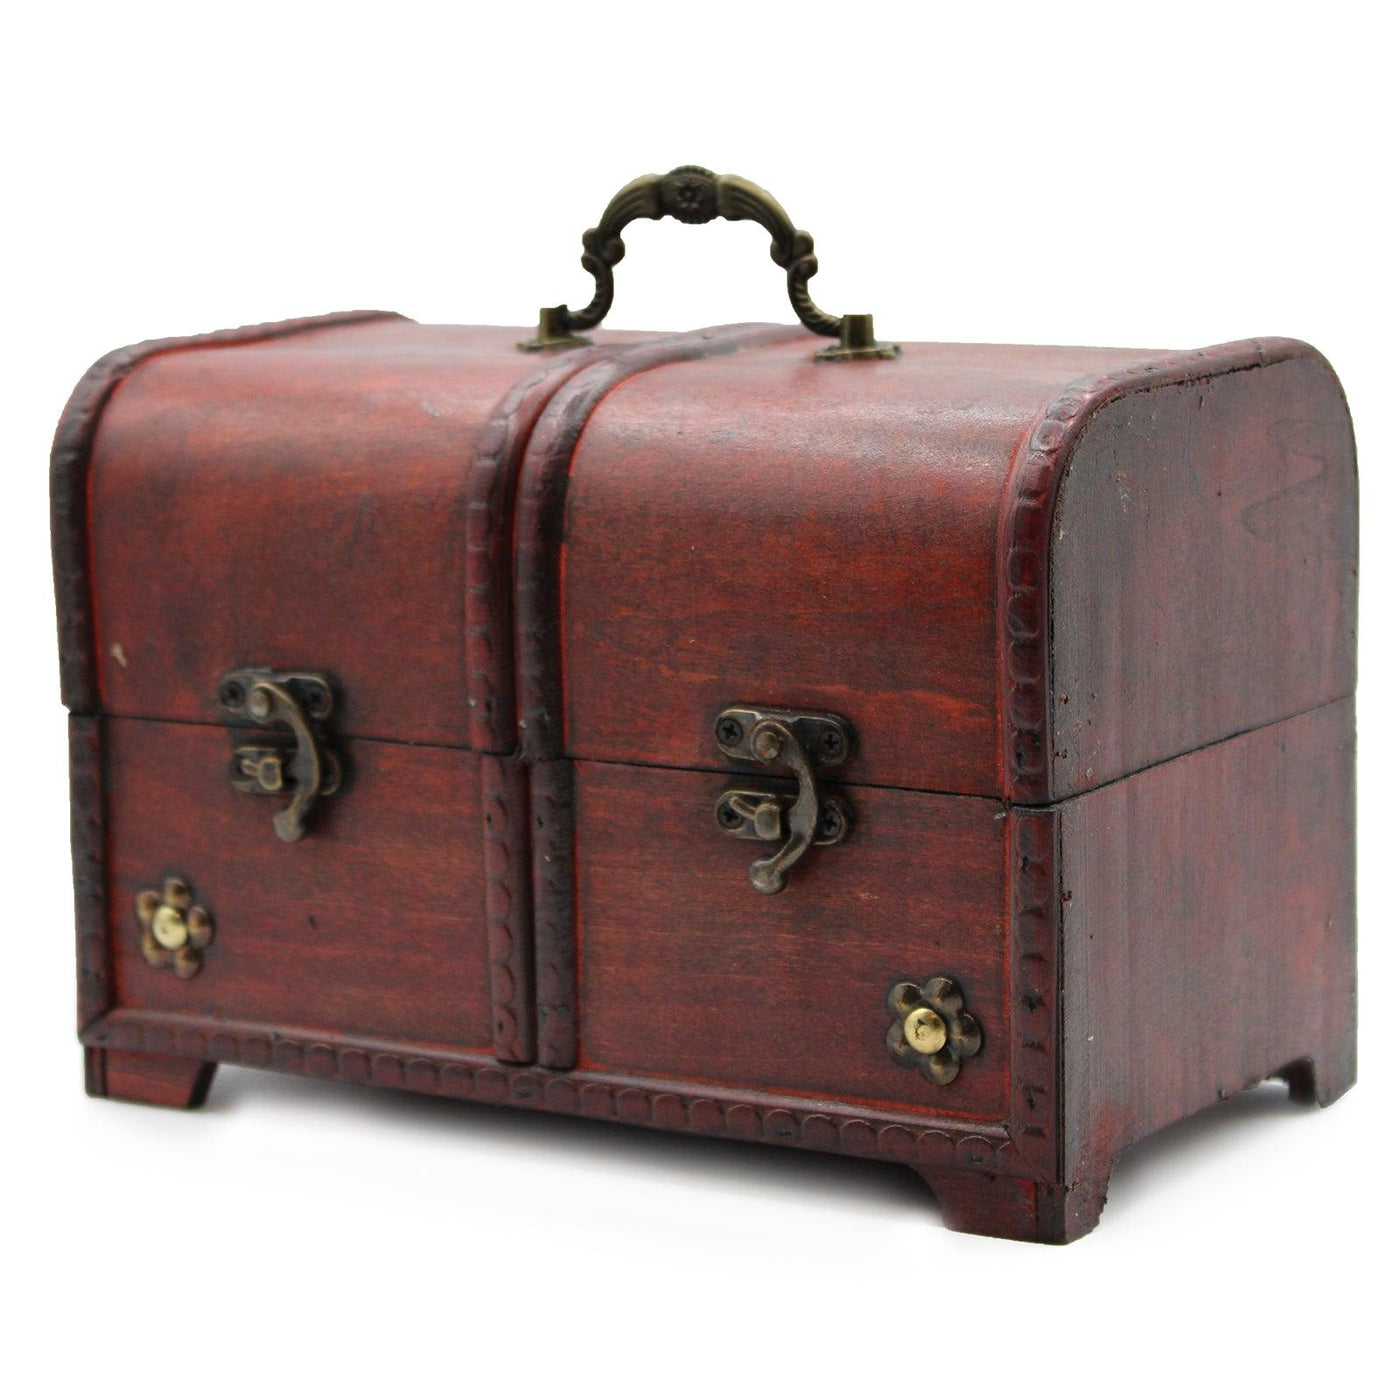 Replica Antique Aged Wooden Storage Chest - Set of 3.